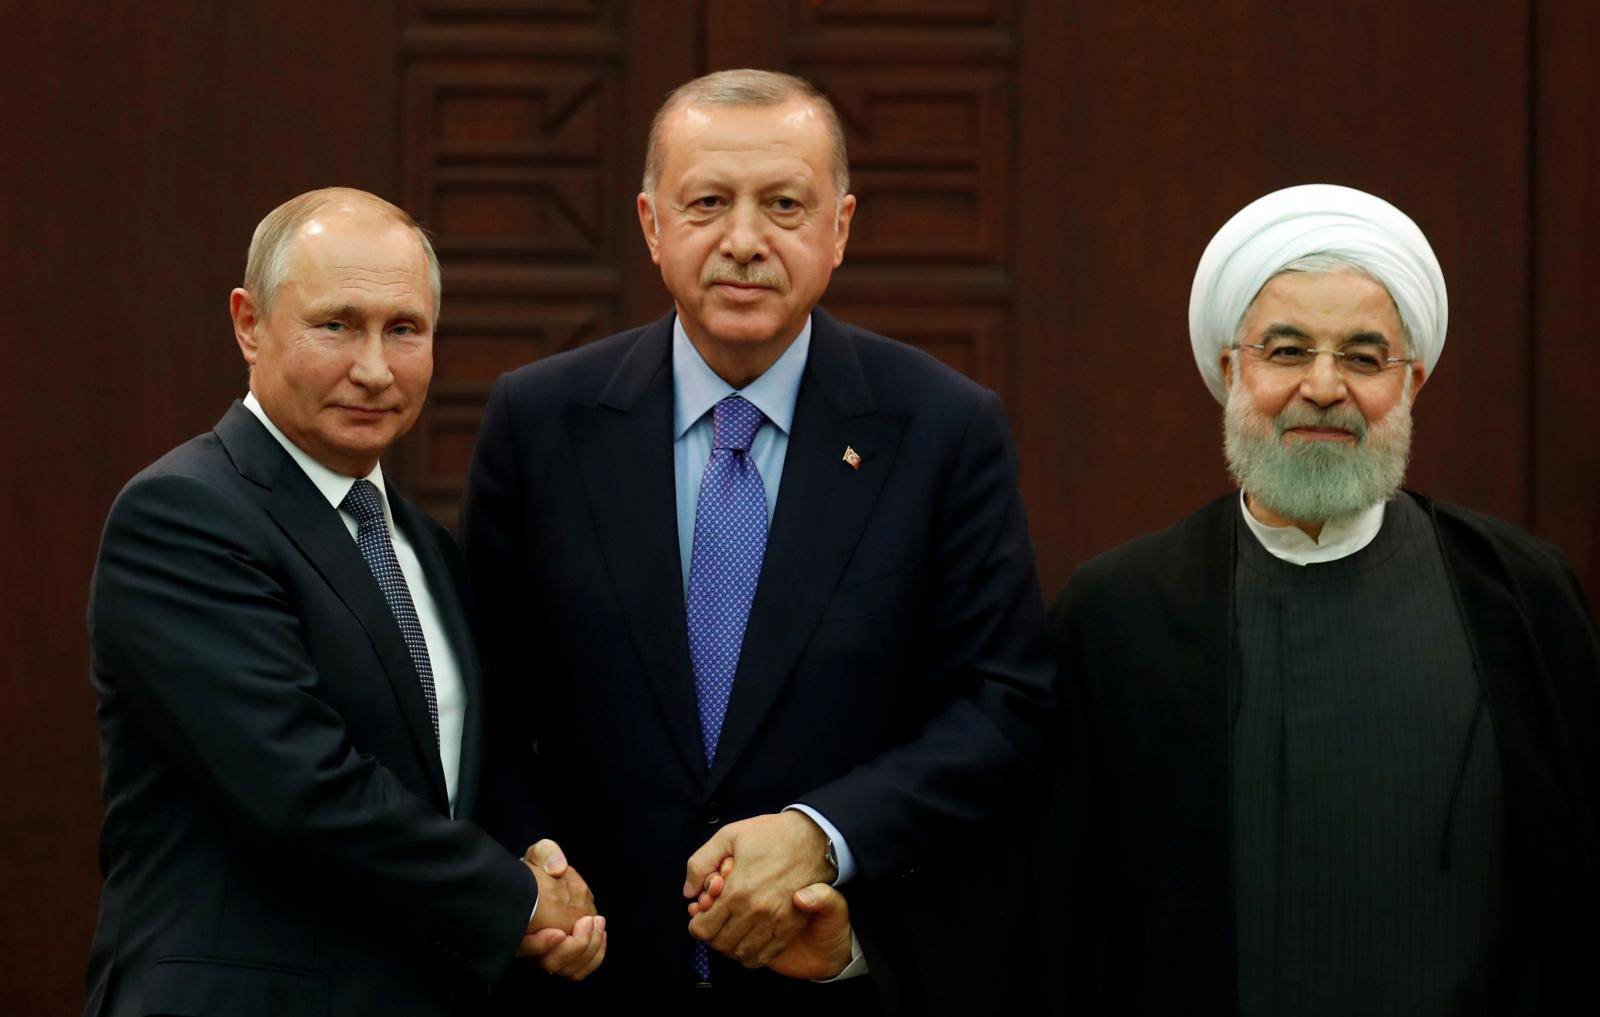 Presidents Putin of Russia, Erdogan of Turkey and Rouhani of Iran pose following a joint news conference in Ankara